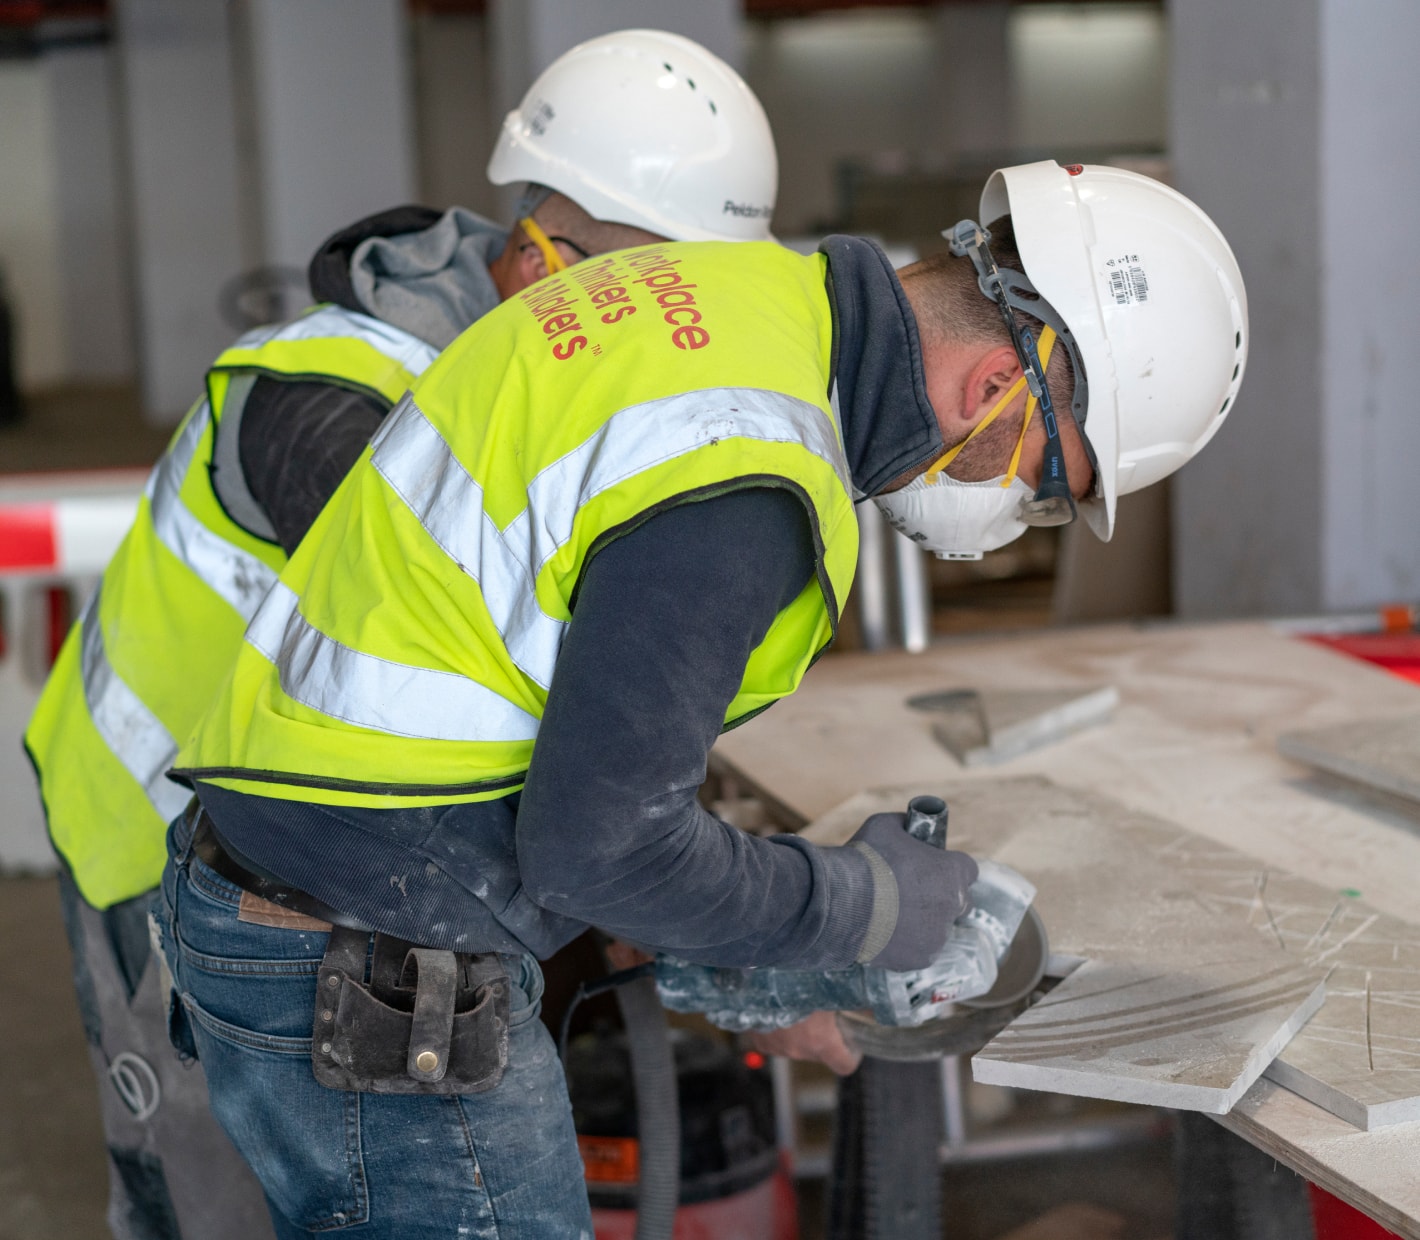 Labourers on a building site cutting materials